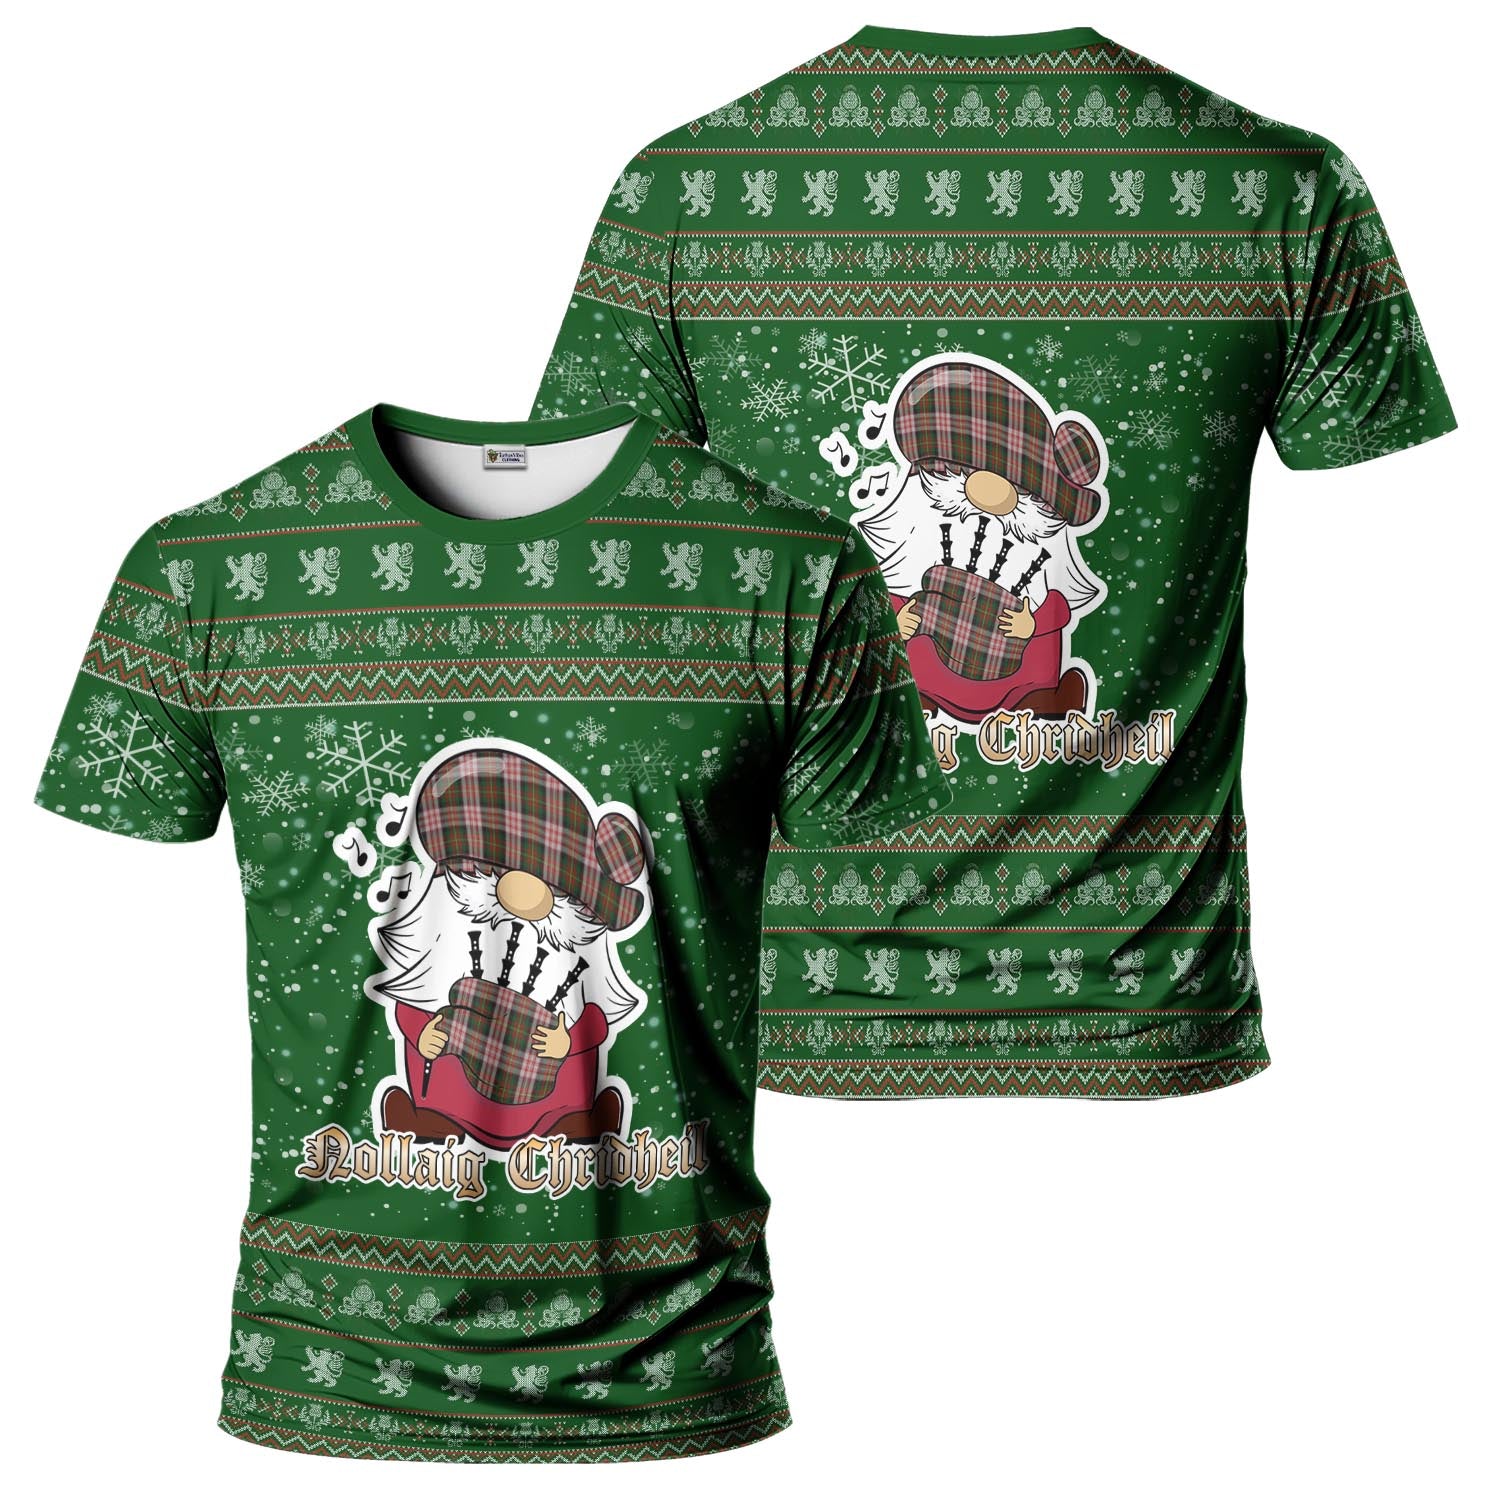 Carnegie Dress Clan Christmas Family T-Shirt with Funny Gnome Playing Bagpipes Men's Shirt Green - Tartanvibesclothing